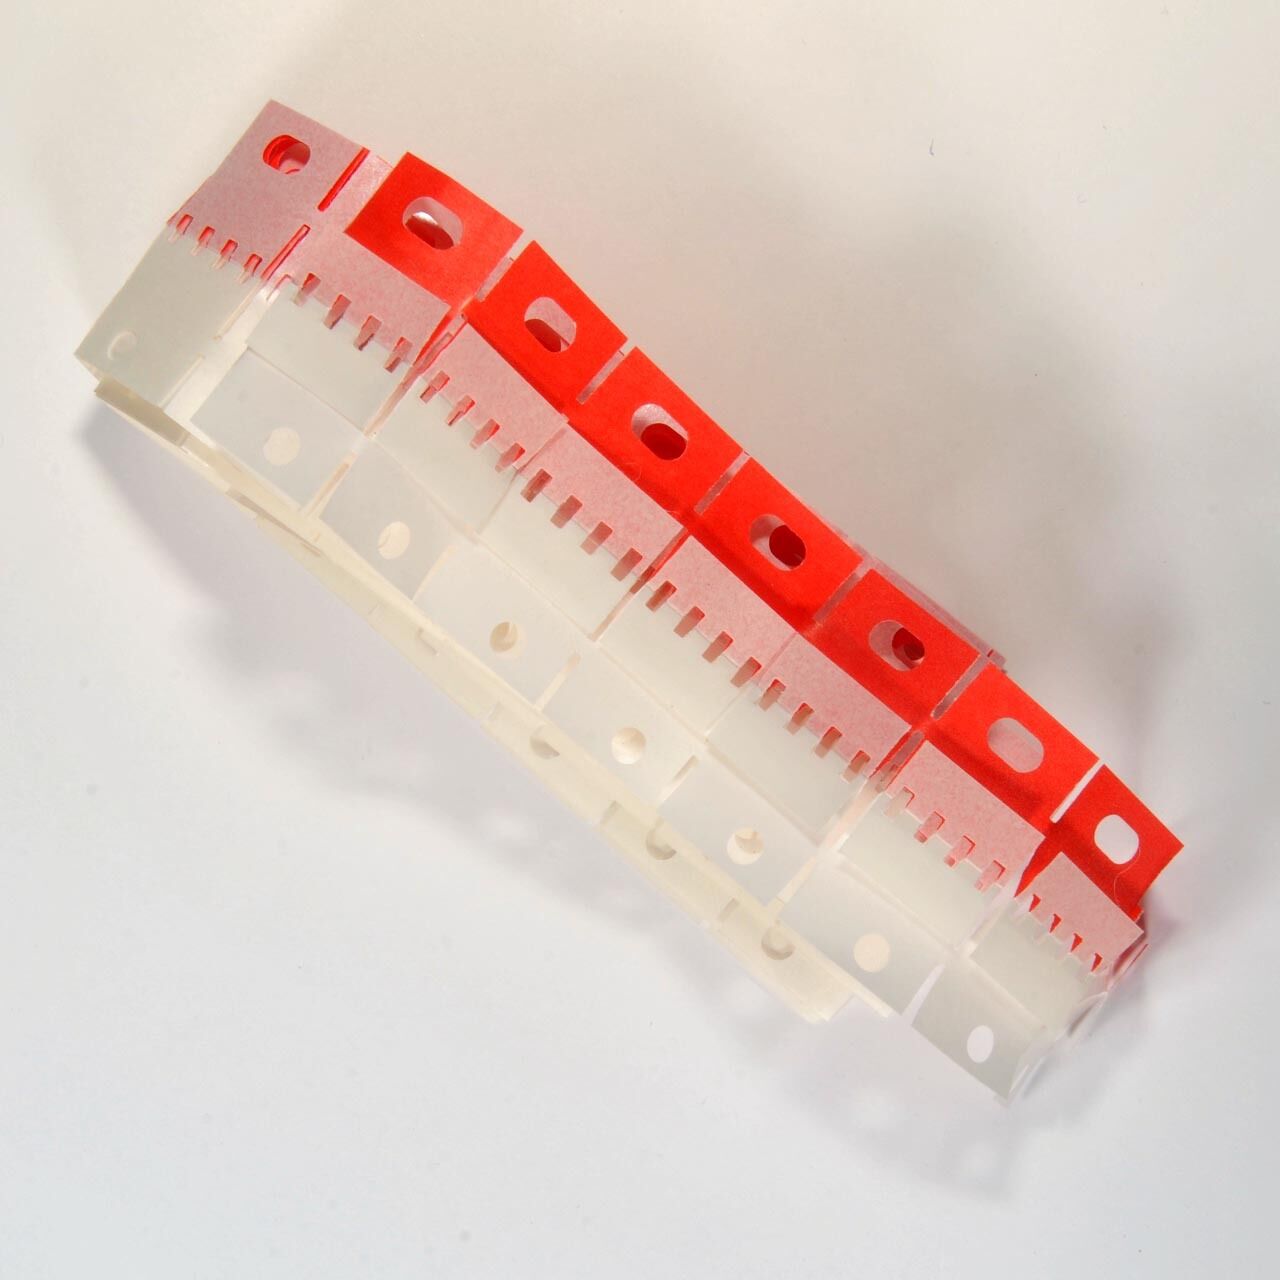 SPLICING TAPE FOR SUPER 8 PACK 100 SPLICE TABS FILM JOINING TAPES SPLICES